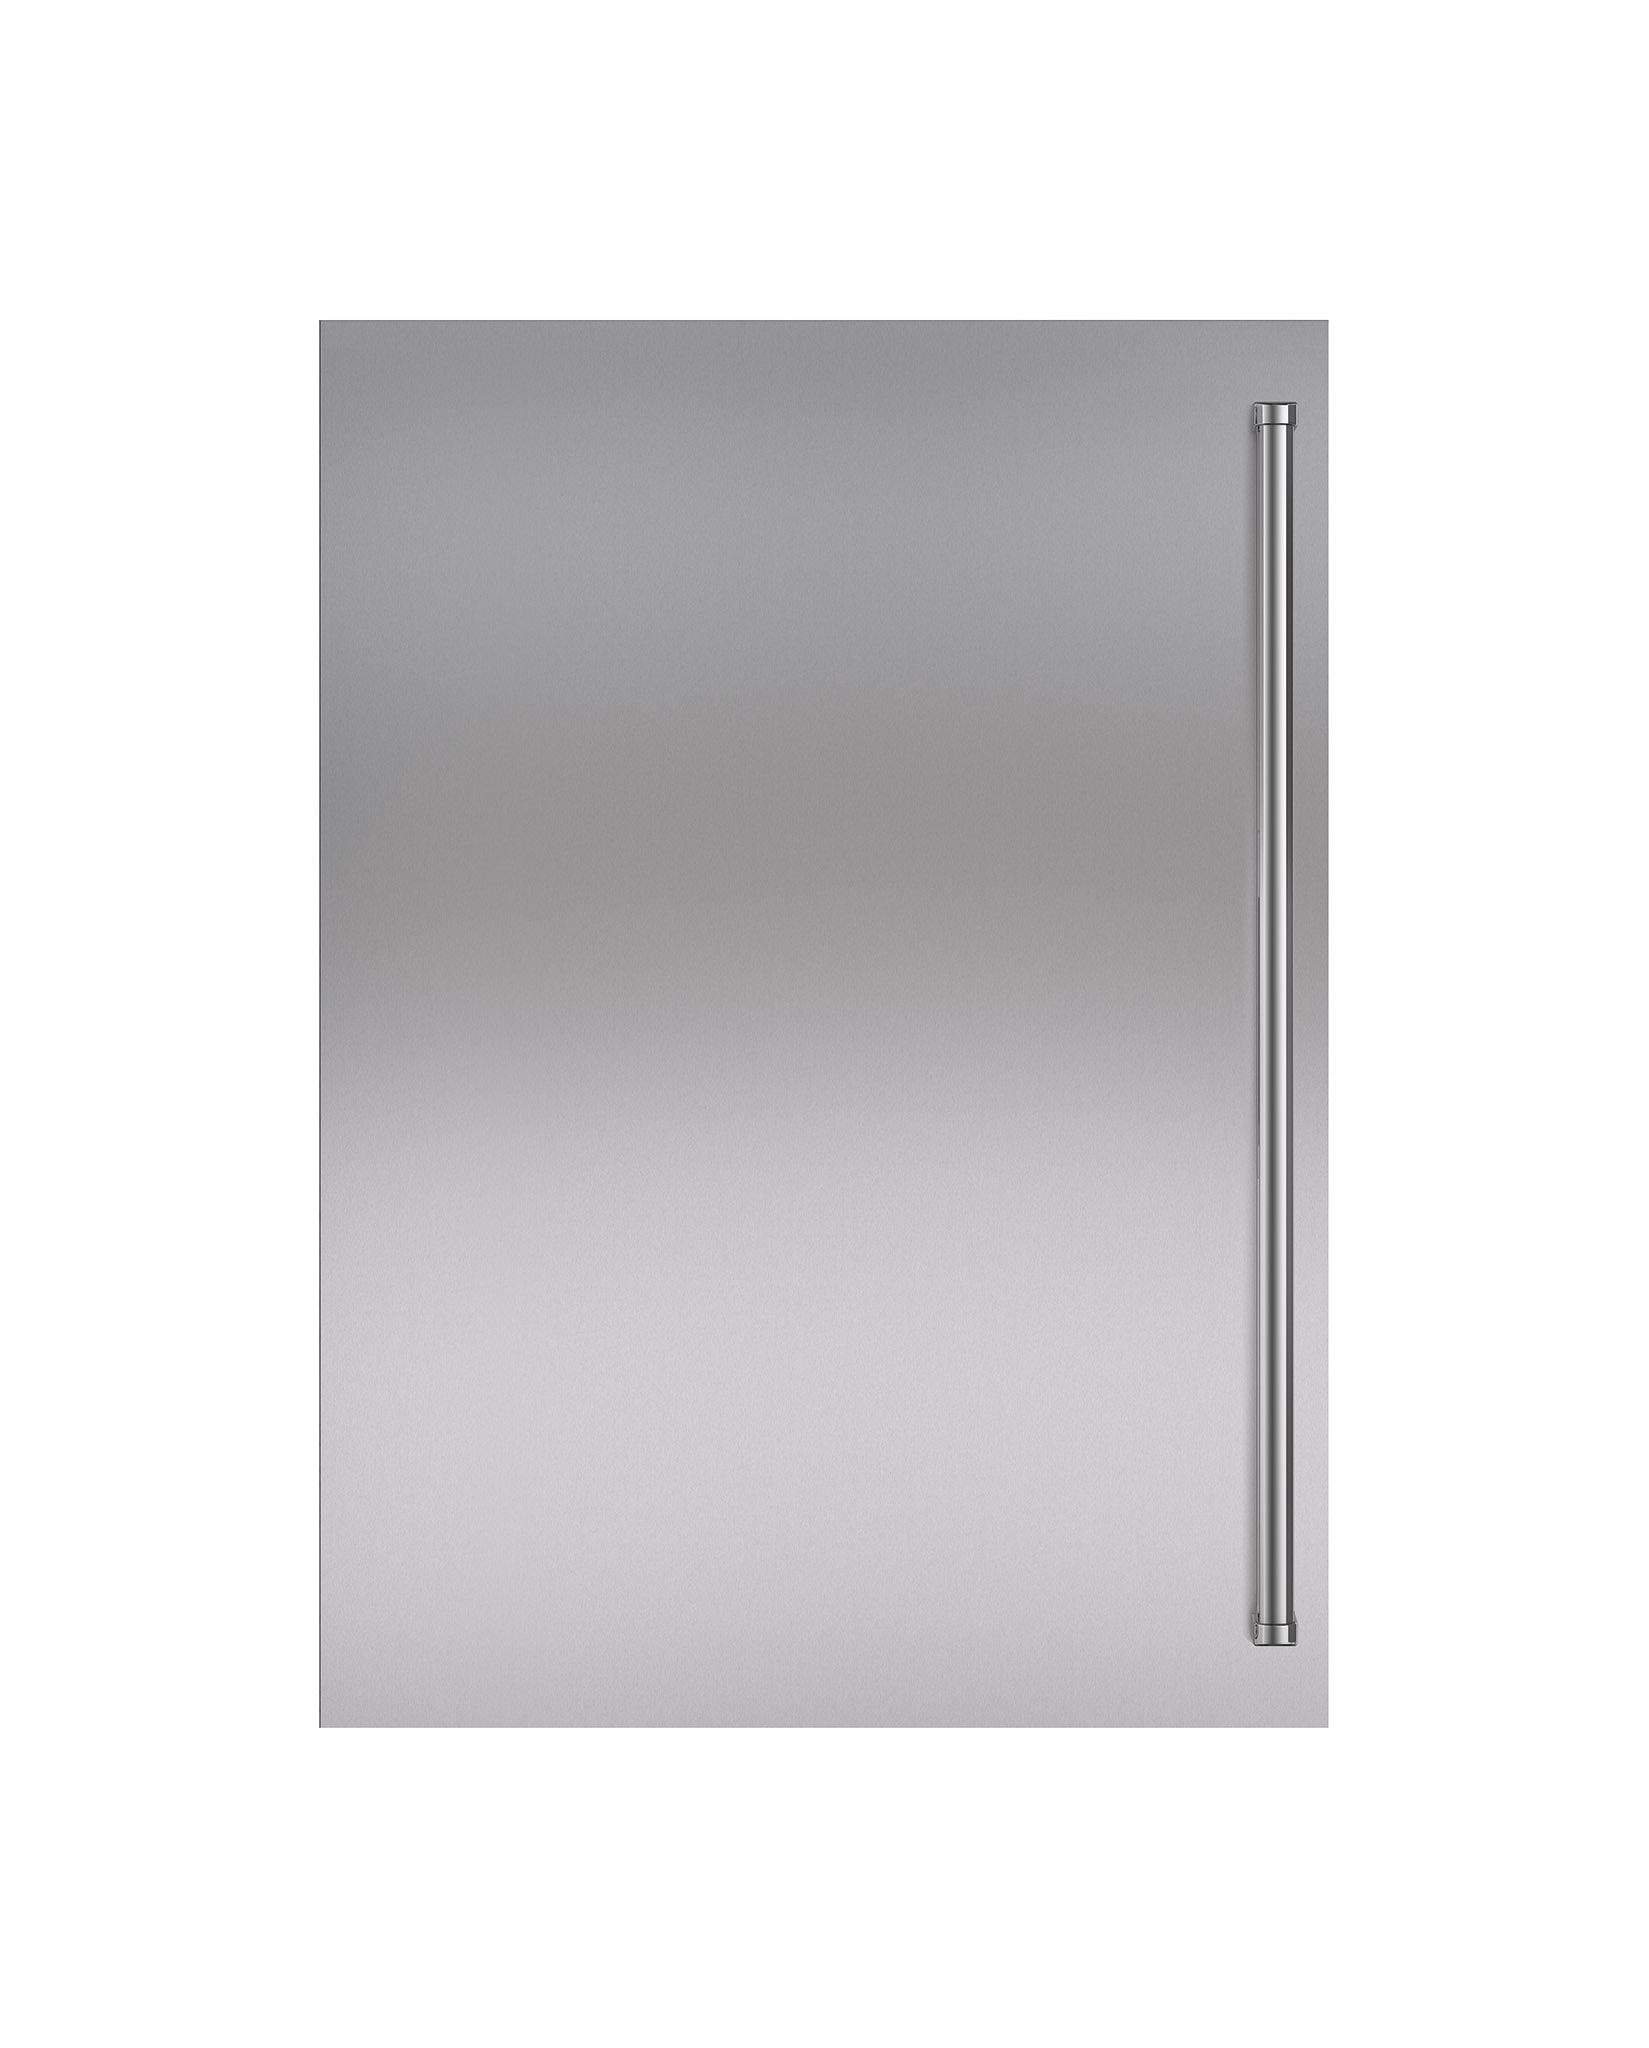 Stainless Steel Flush Inset Door Panel with Pro Handle